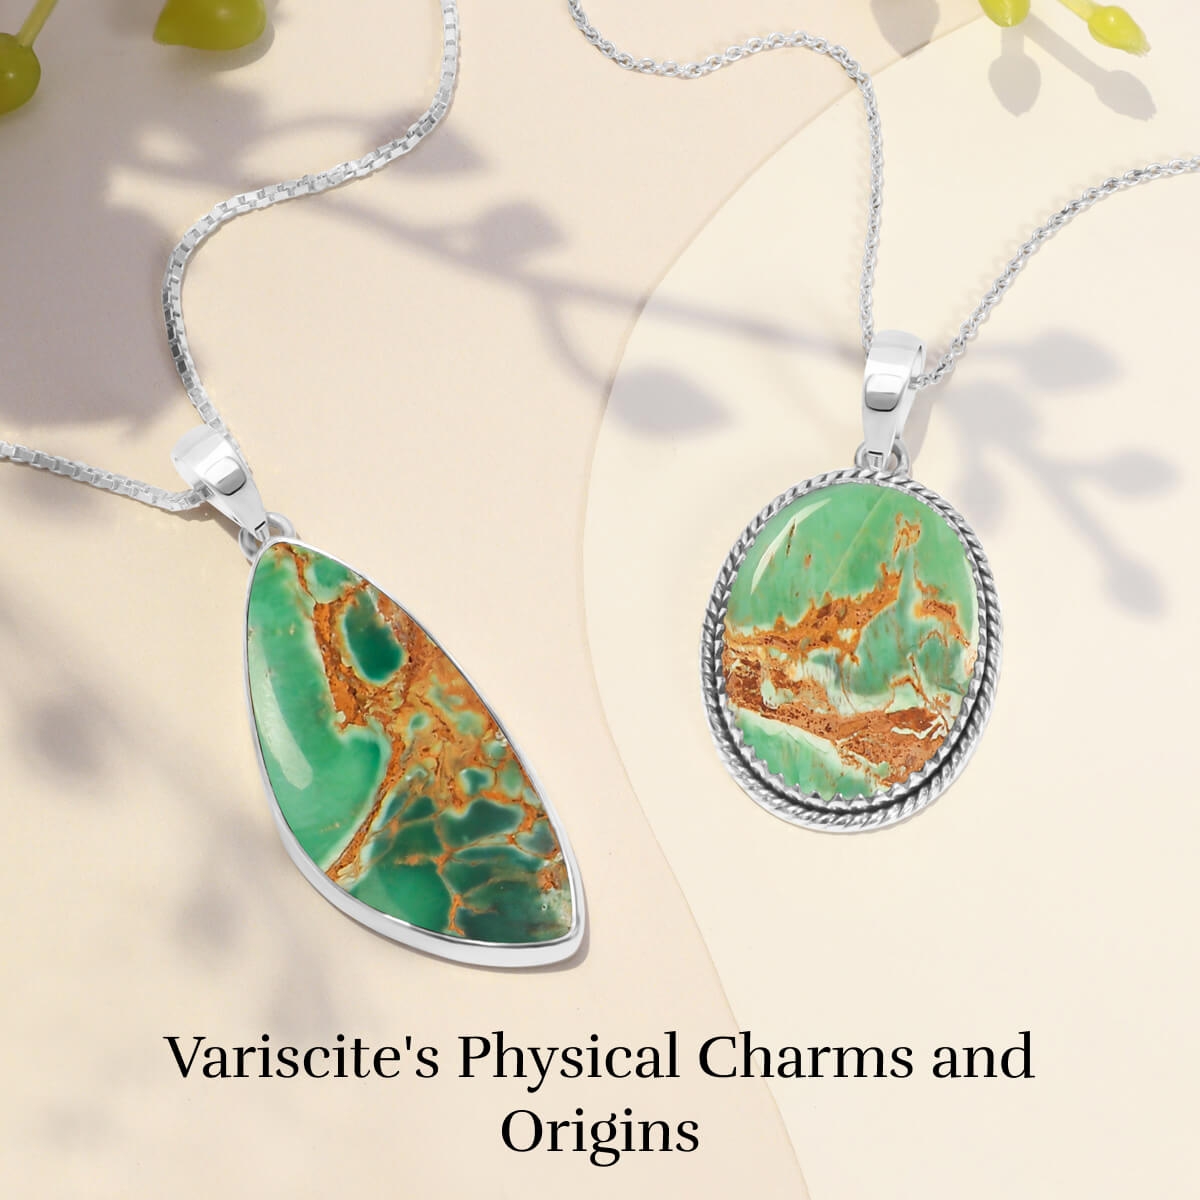 Physical Properties of Variscite Stone & How They Occur